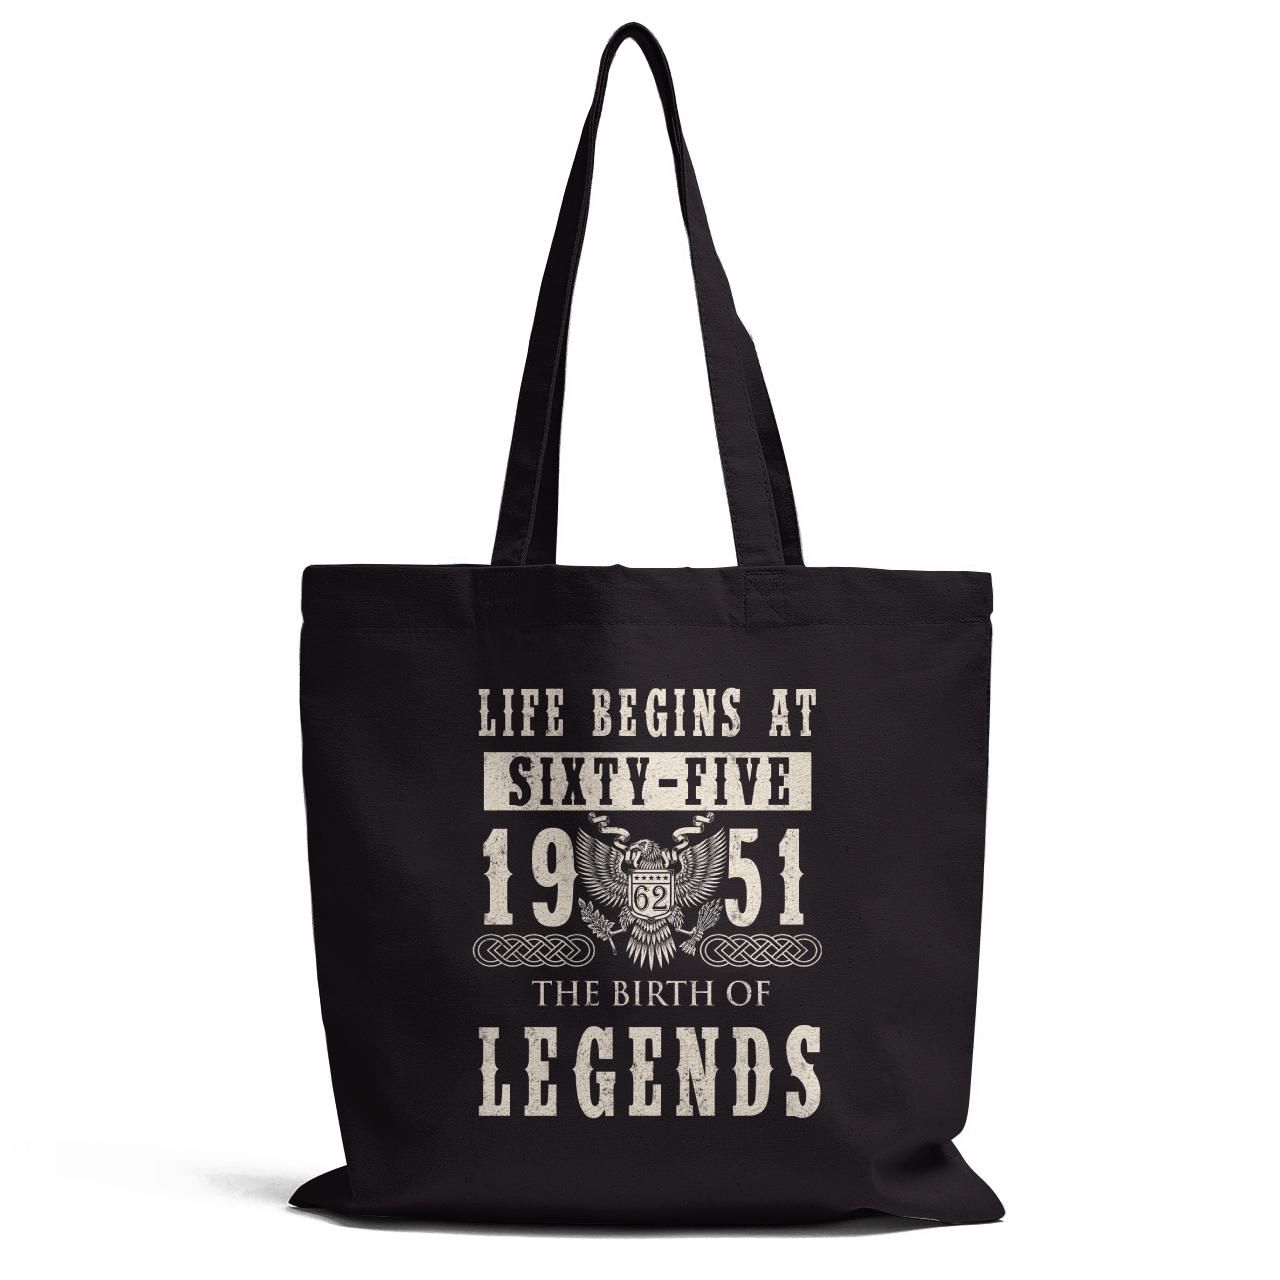 Life Begins At Sixty Five 1951 The Birth Of Legends Tote Bag